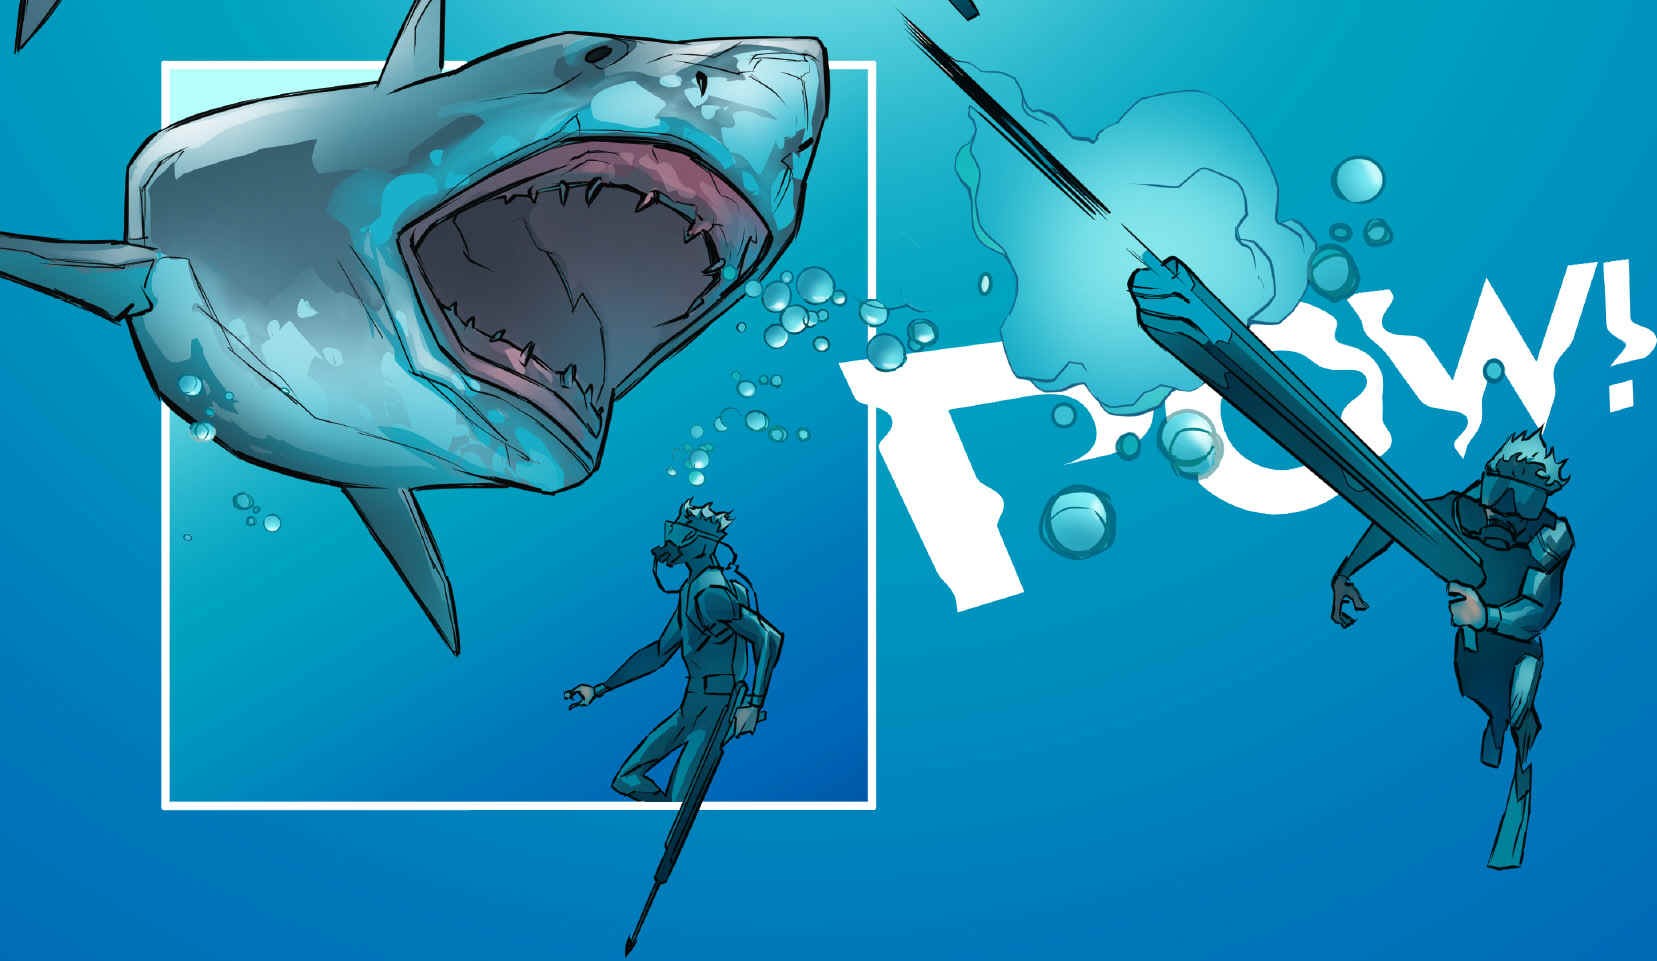 John Storm takes on a great white shark, fighting it off with a speargun